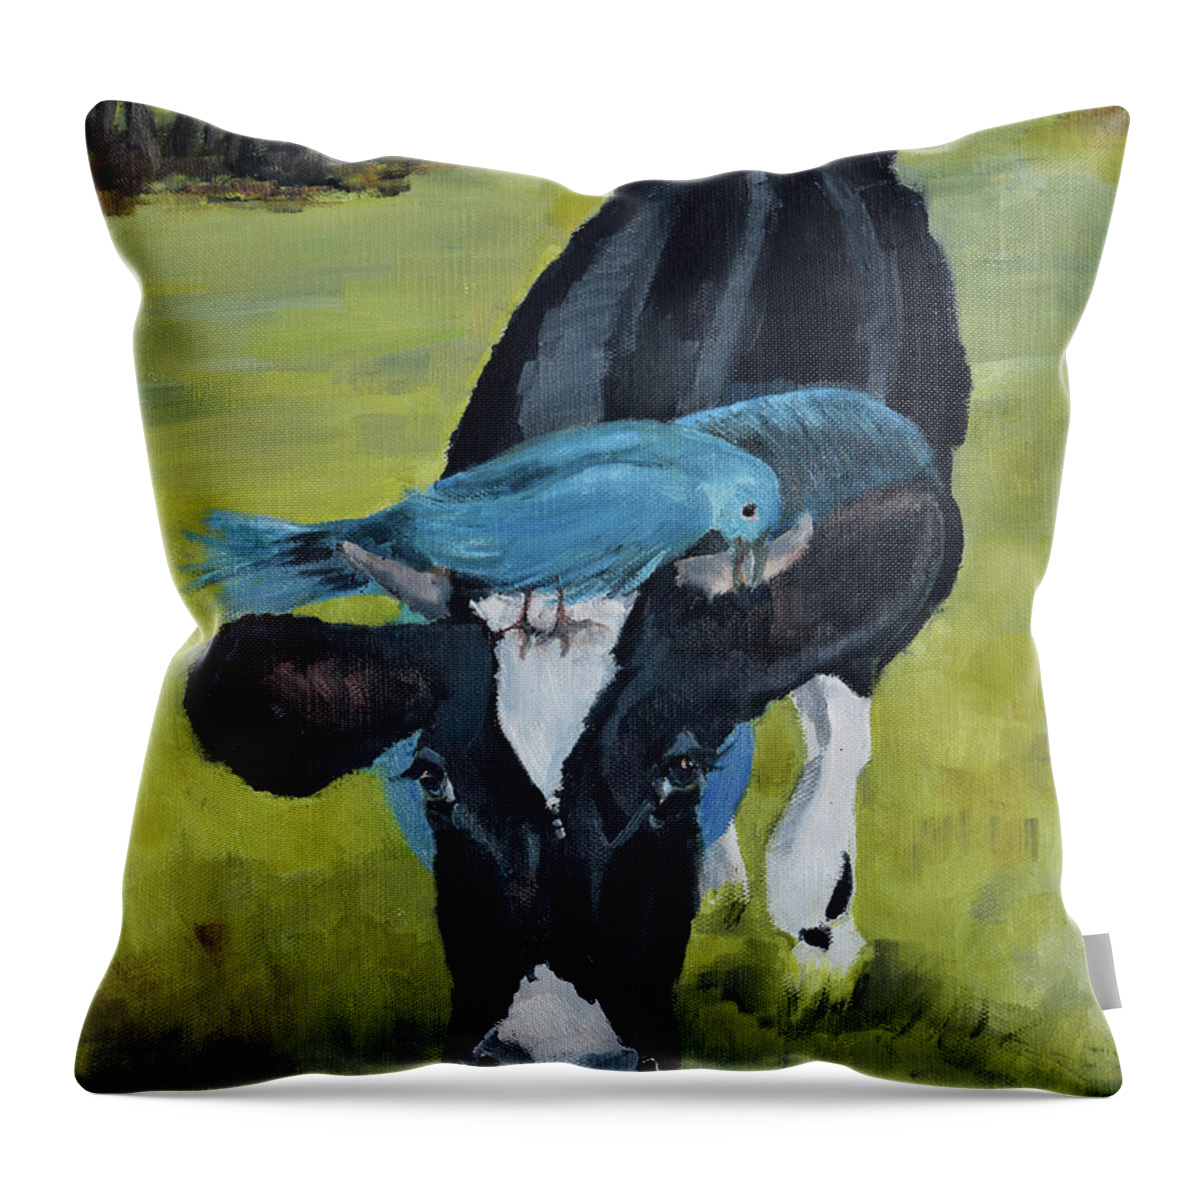  Throw Pillow featuring the painting Lovey Dovey on Bessies Head by Jan Dappen